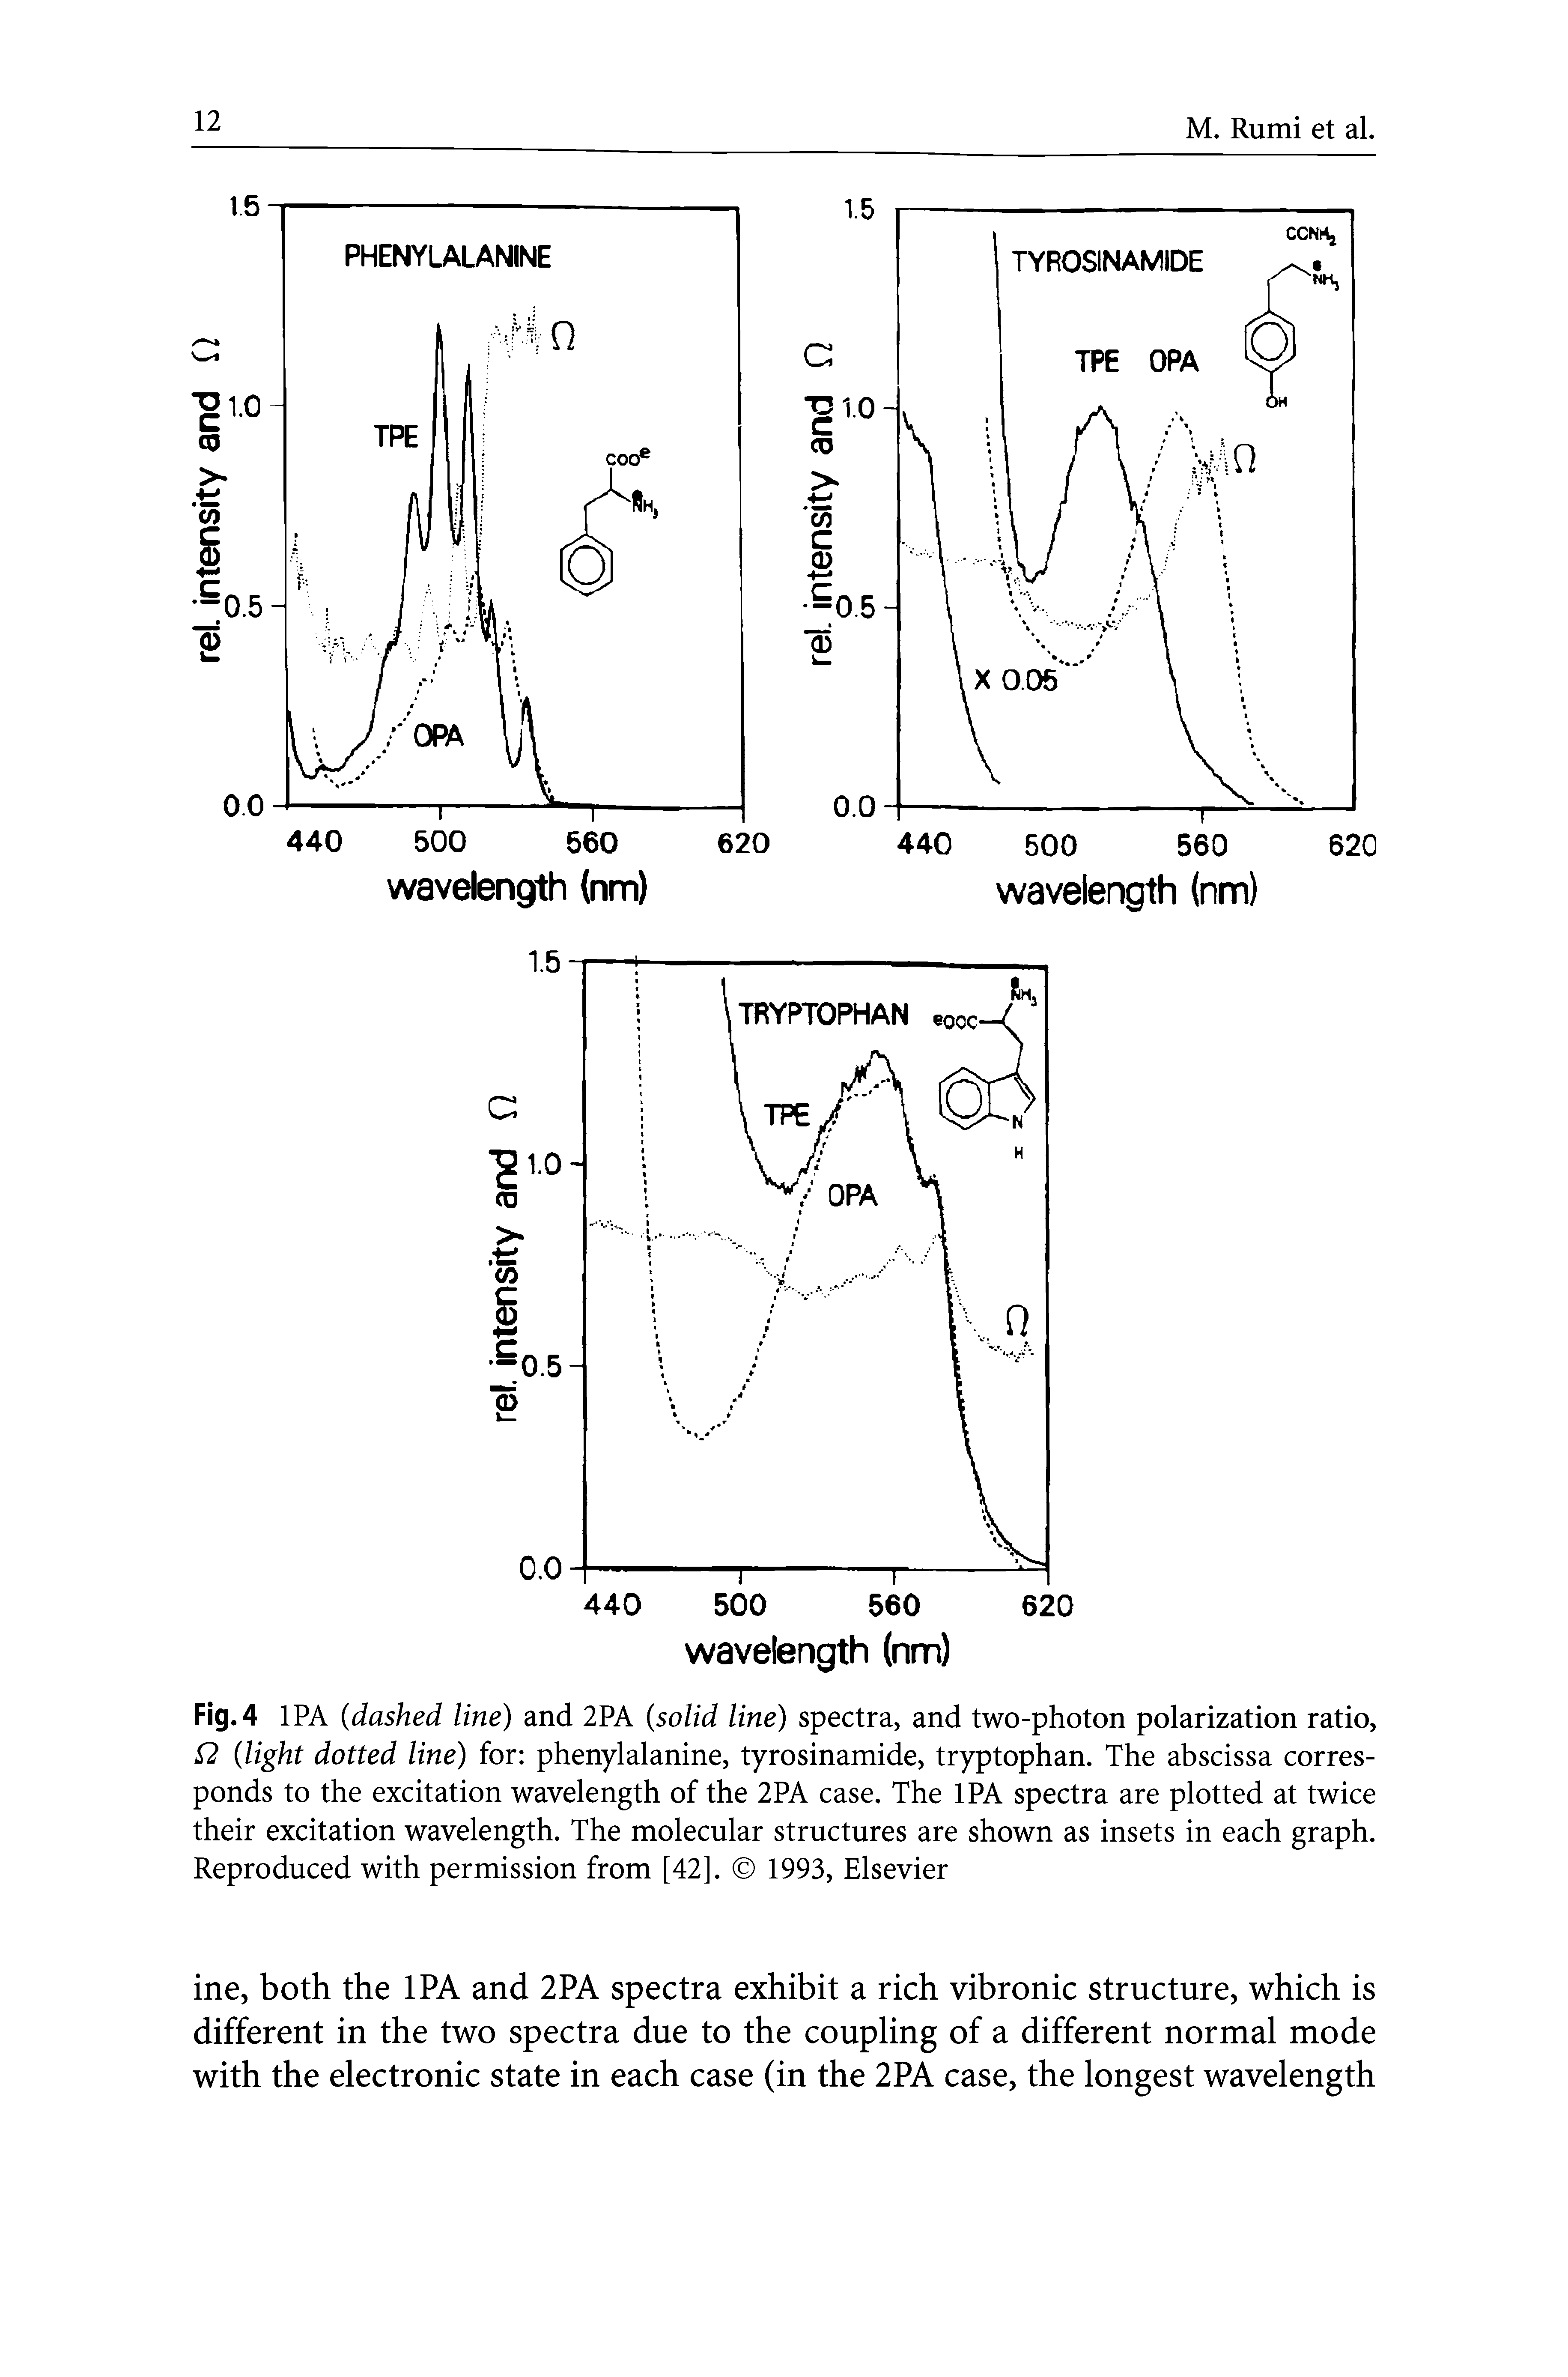 Fig. 4 IPA (dashed line) and 2PA (solid line) spectra, and two-photon polarization ratio, (light dotted line) for phenylalanine, tyrosinamide, tryptophan. The abscissa corresponds to the excitation wavelength of the 2PA case. The IPA spectra are plotted at twice their excitation wavelength. The molecular structures are shown as insets in each graph. Reproduced with permission from [42]. 1993, Elsevier...